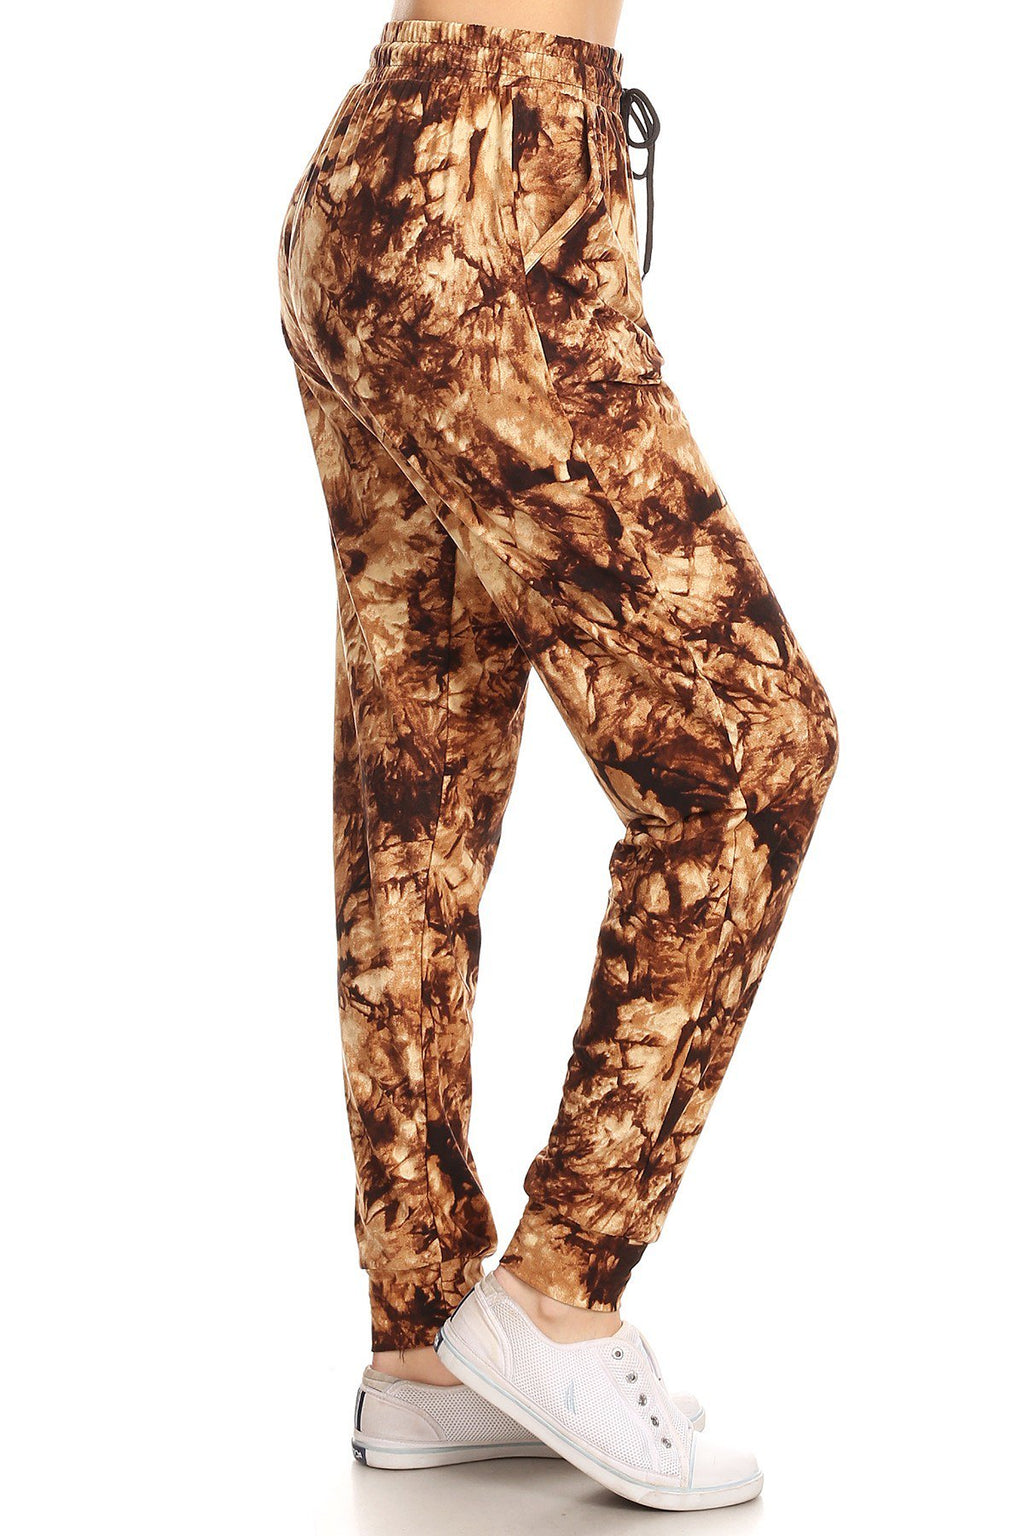 BROWN TIE DYE joggers with solid trim, drawstring waistband, waist pockets, and cuffed hems